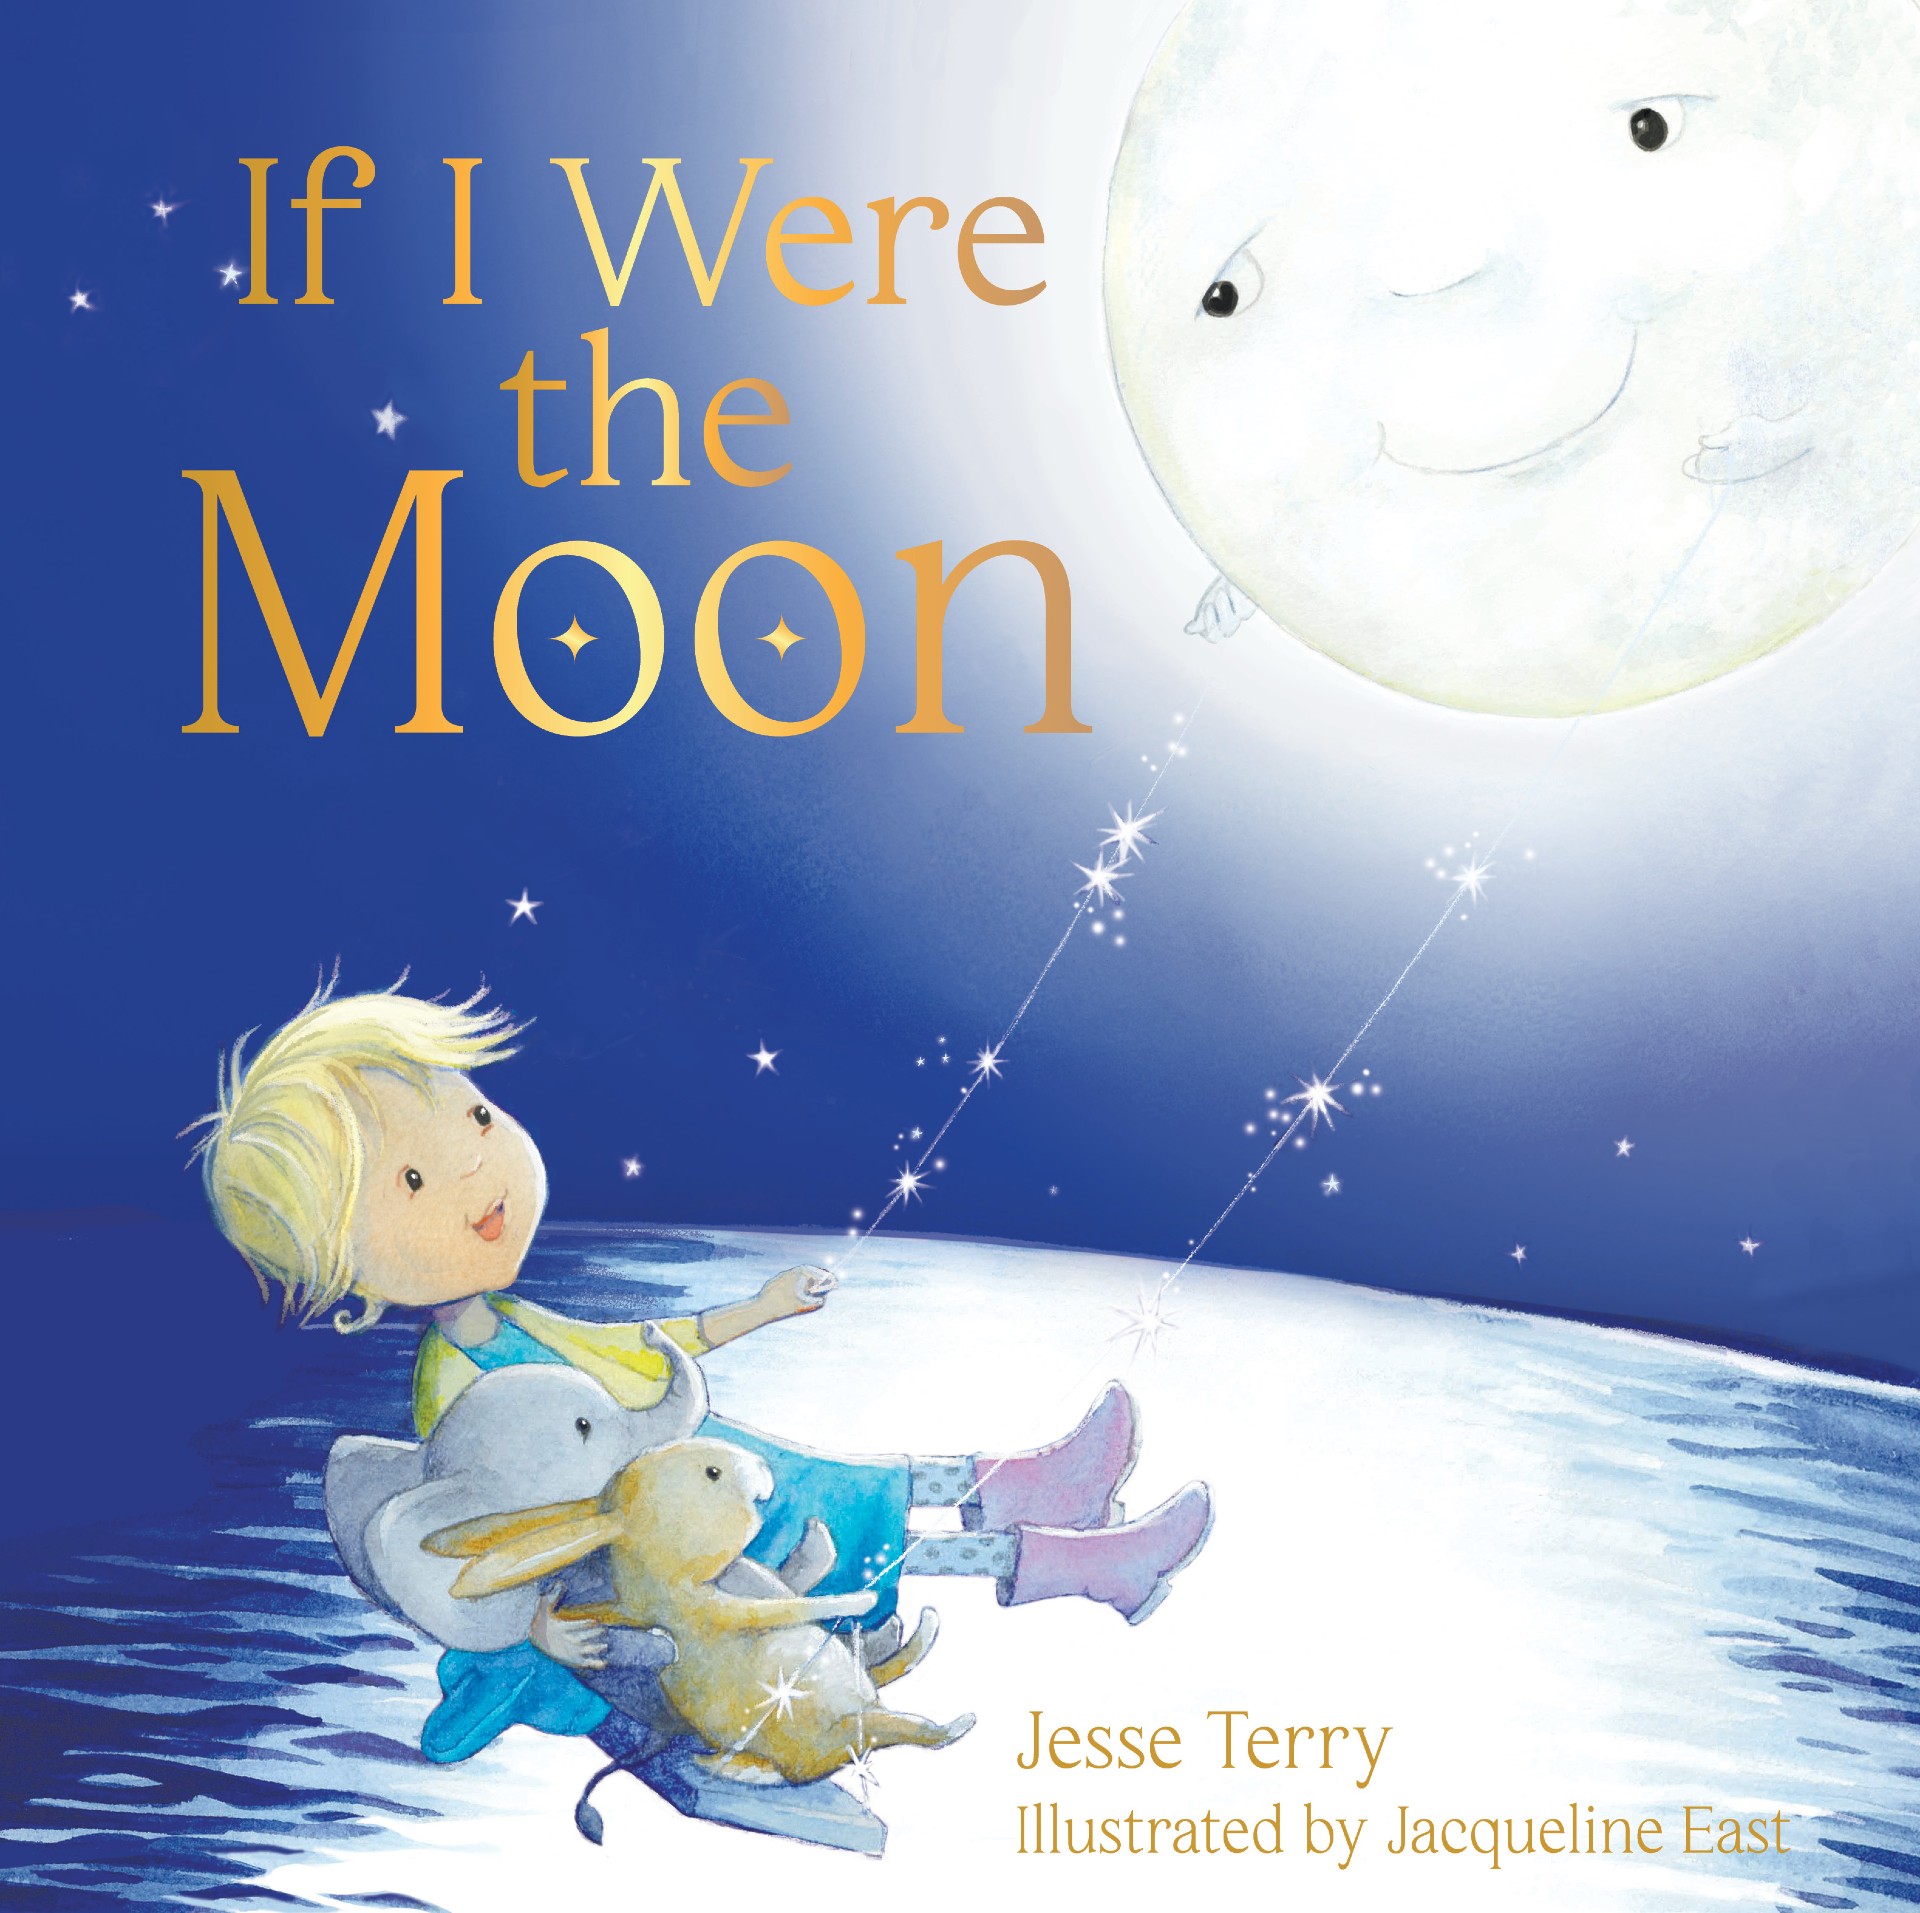 Artwork for the book “If I Were The Moon” by Jesse Terry